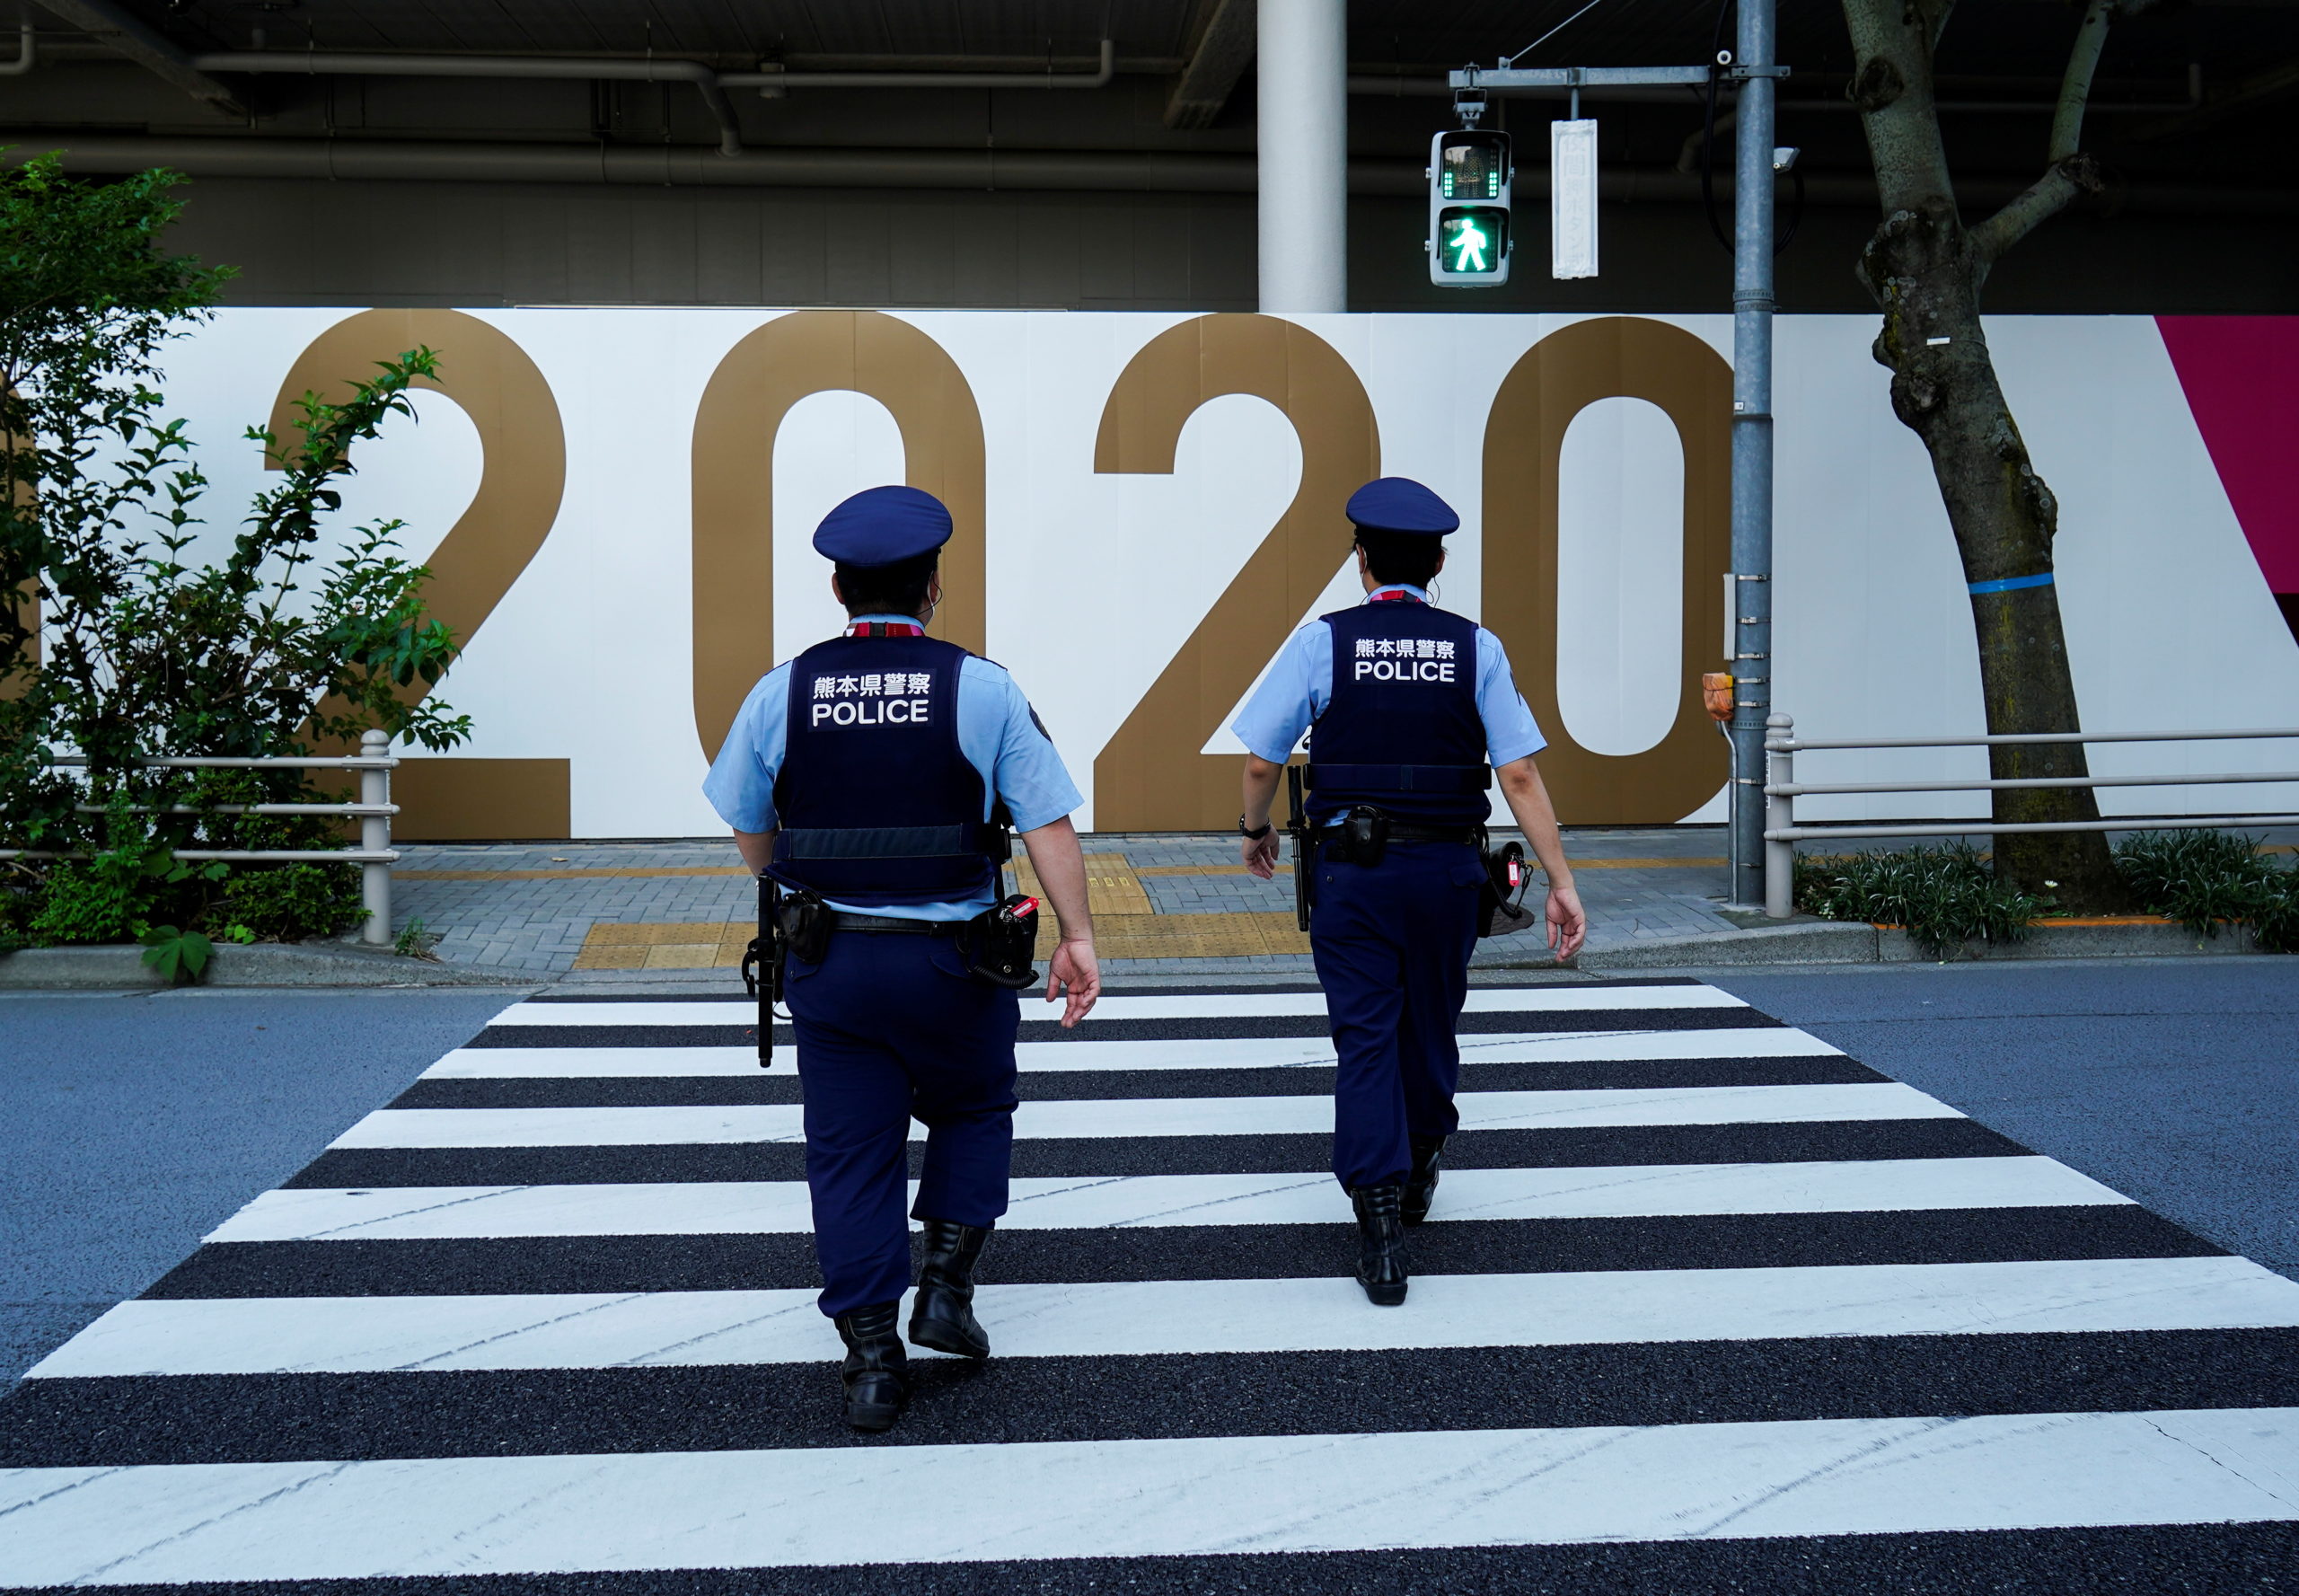 Police officers patrol outside the National Stadium, the main venue of Tokyo 2020 Olympics and Paralympics in Tokyo, Japan, July 19, 2021. 